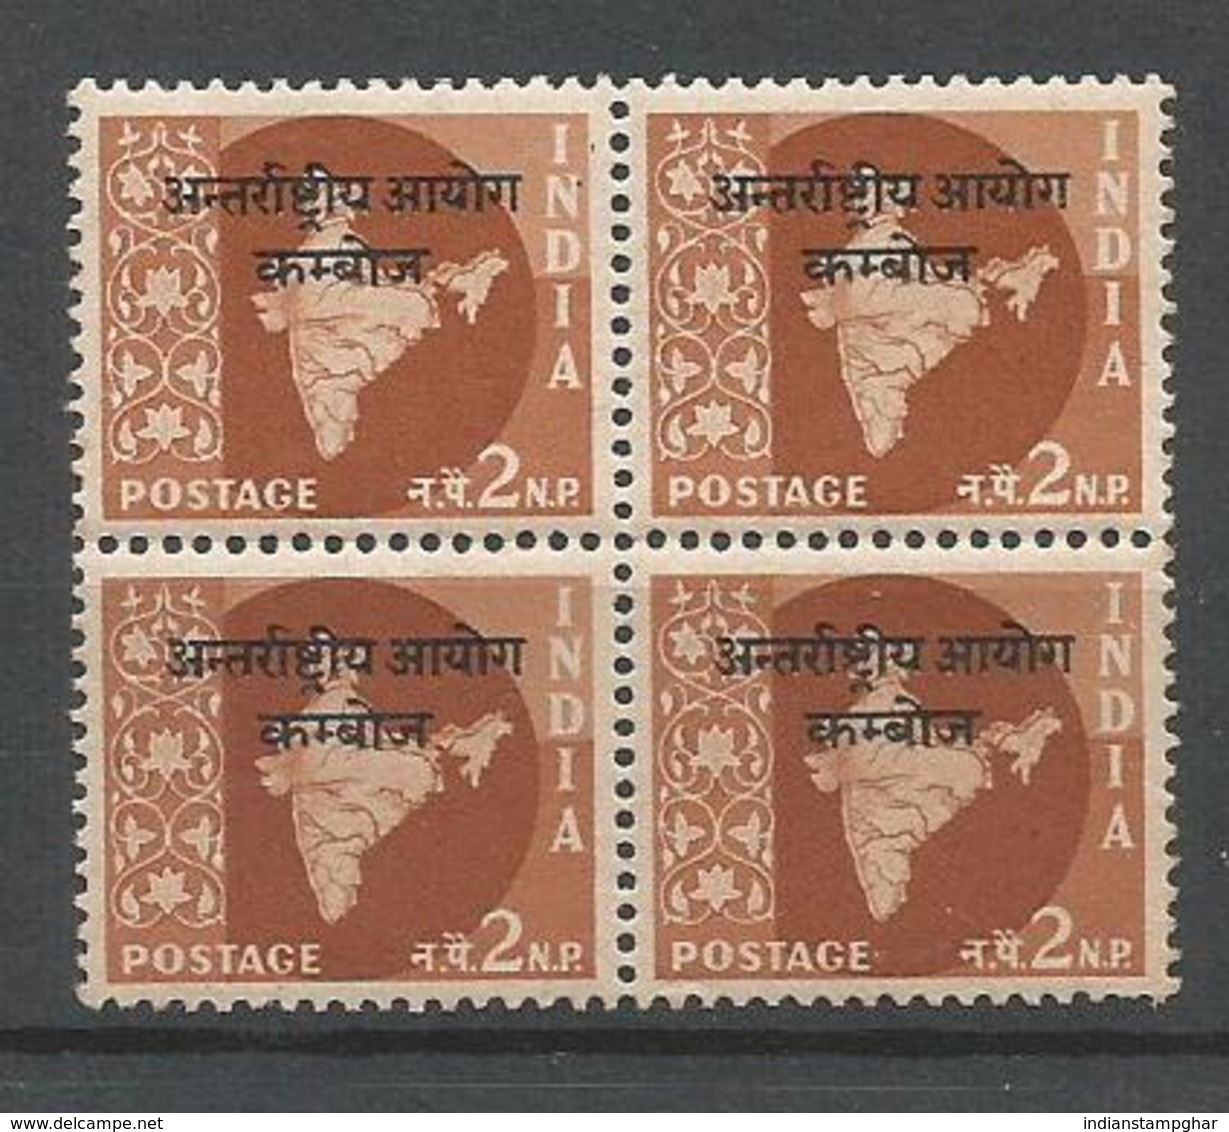 Cambodia Opvt. On 2np Map, Block Of 4, MNH 1962 Star Wmk, Military Stamps, As Per Scan - Militaire Vrijstelling Van Portkosten